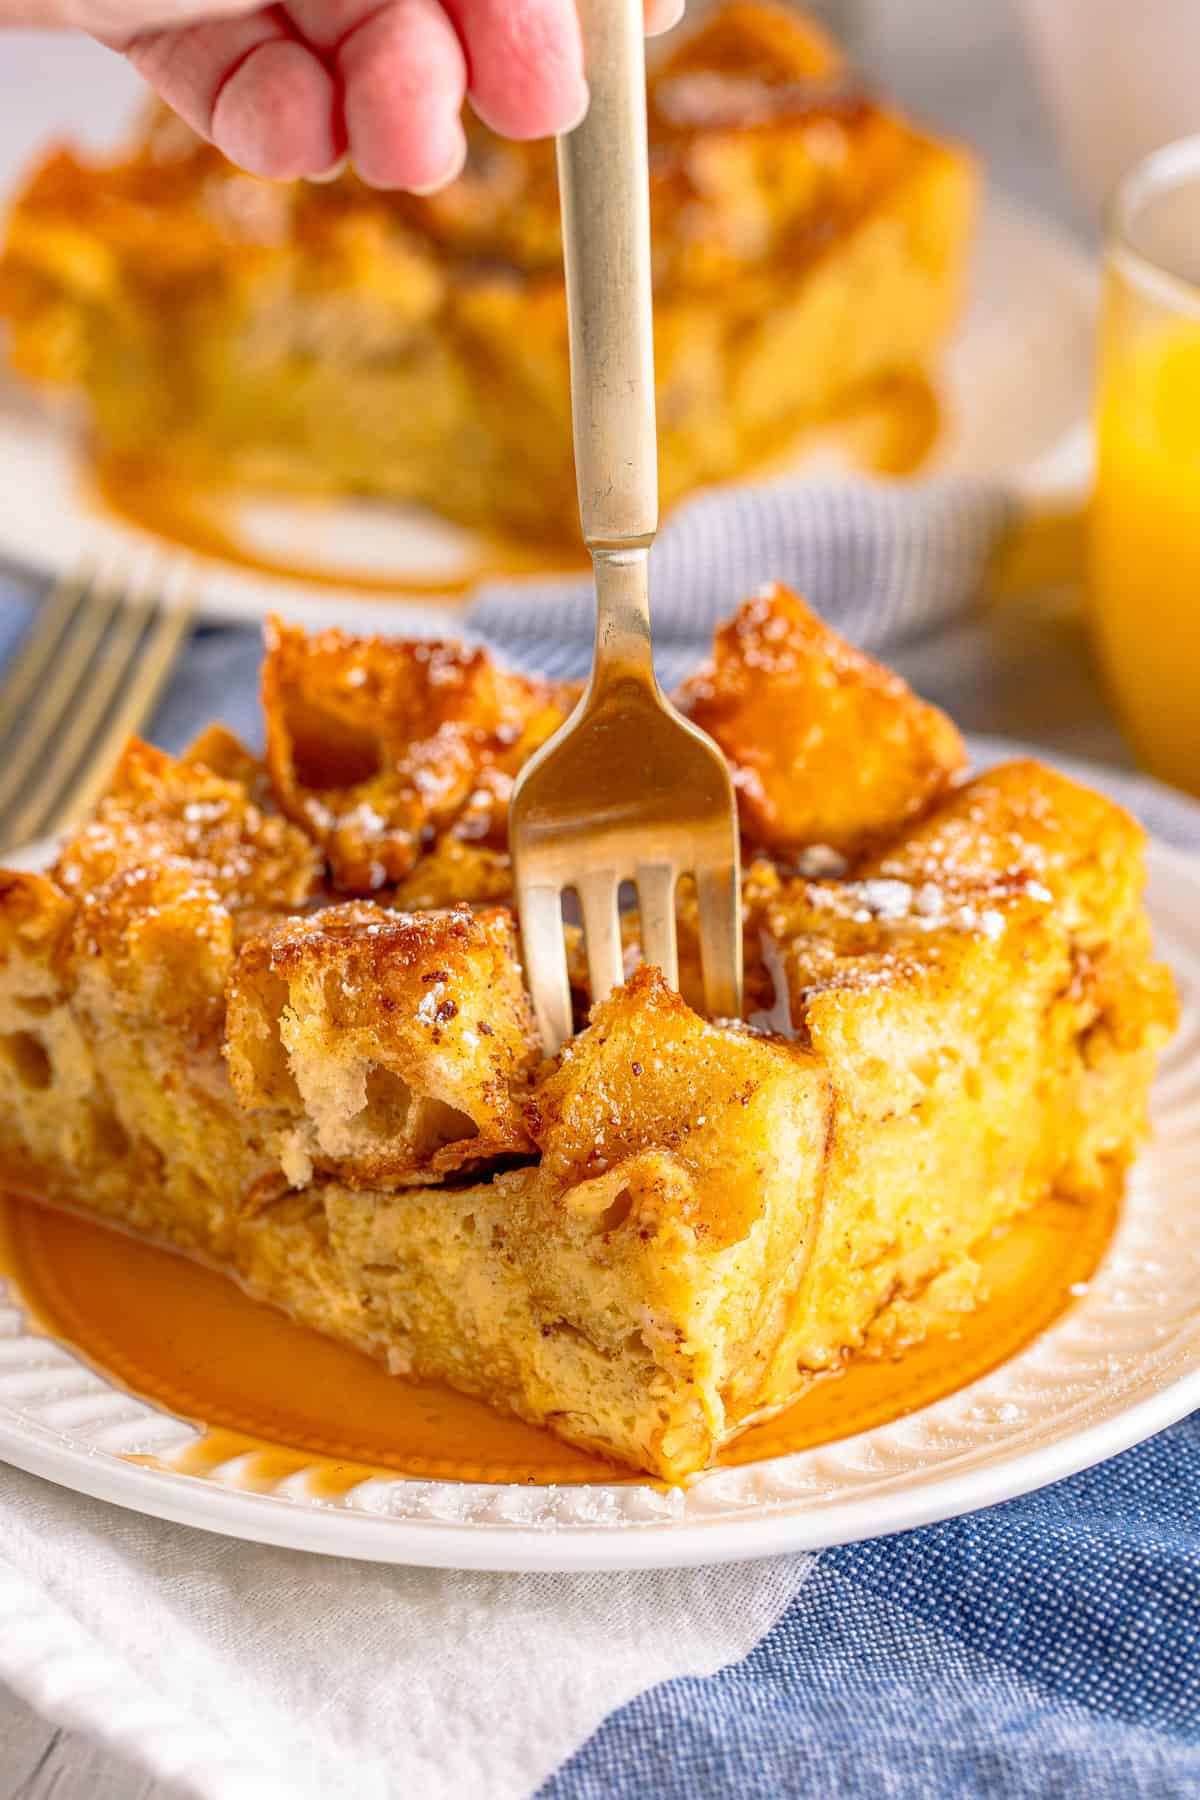 Fork digging into a piece of golden brown maple-syrup drenched French Toast casserole.